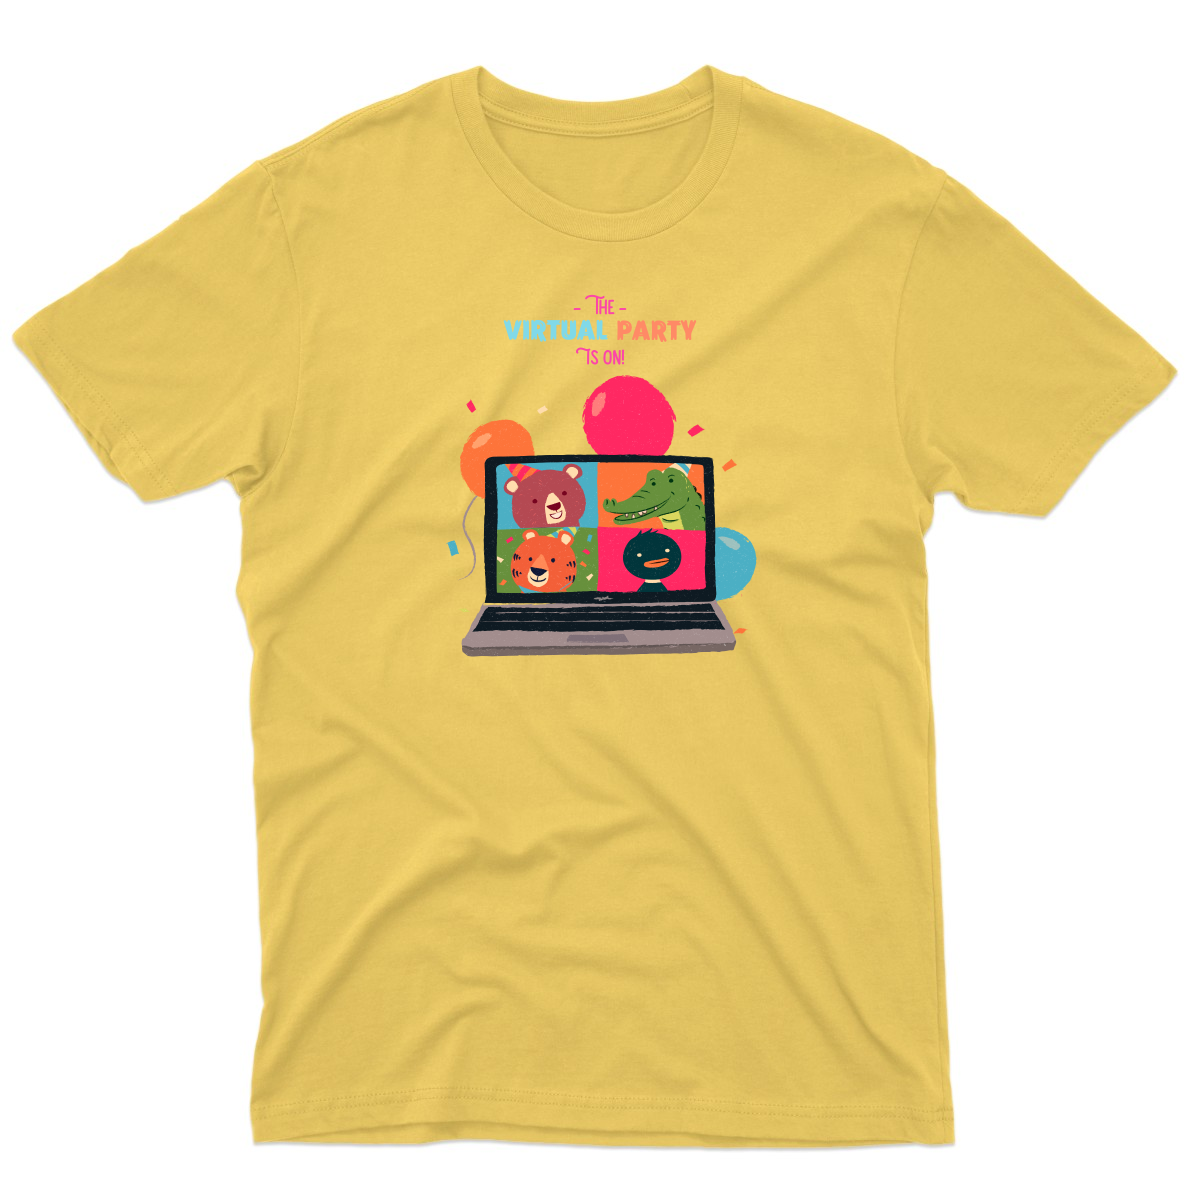 The Virtual Party is on Men's T-shirt | Yellow